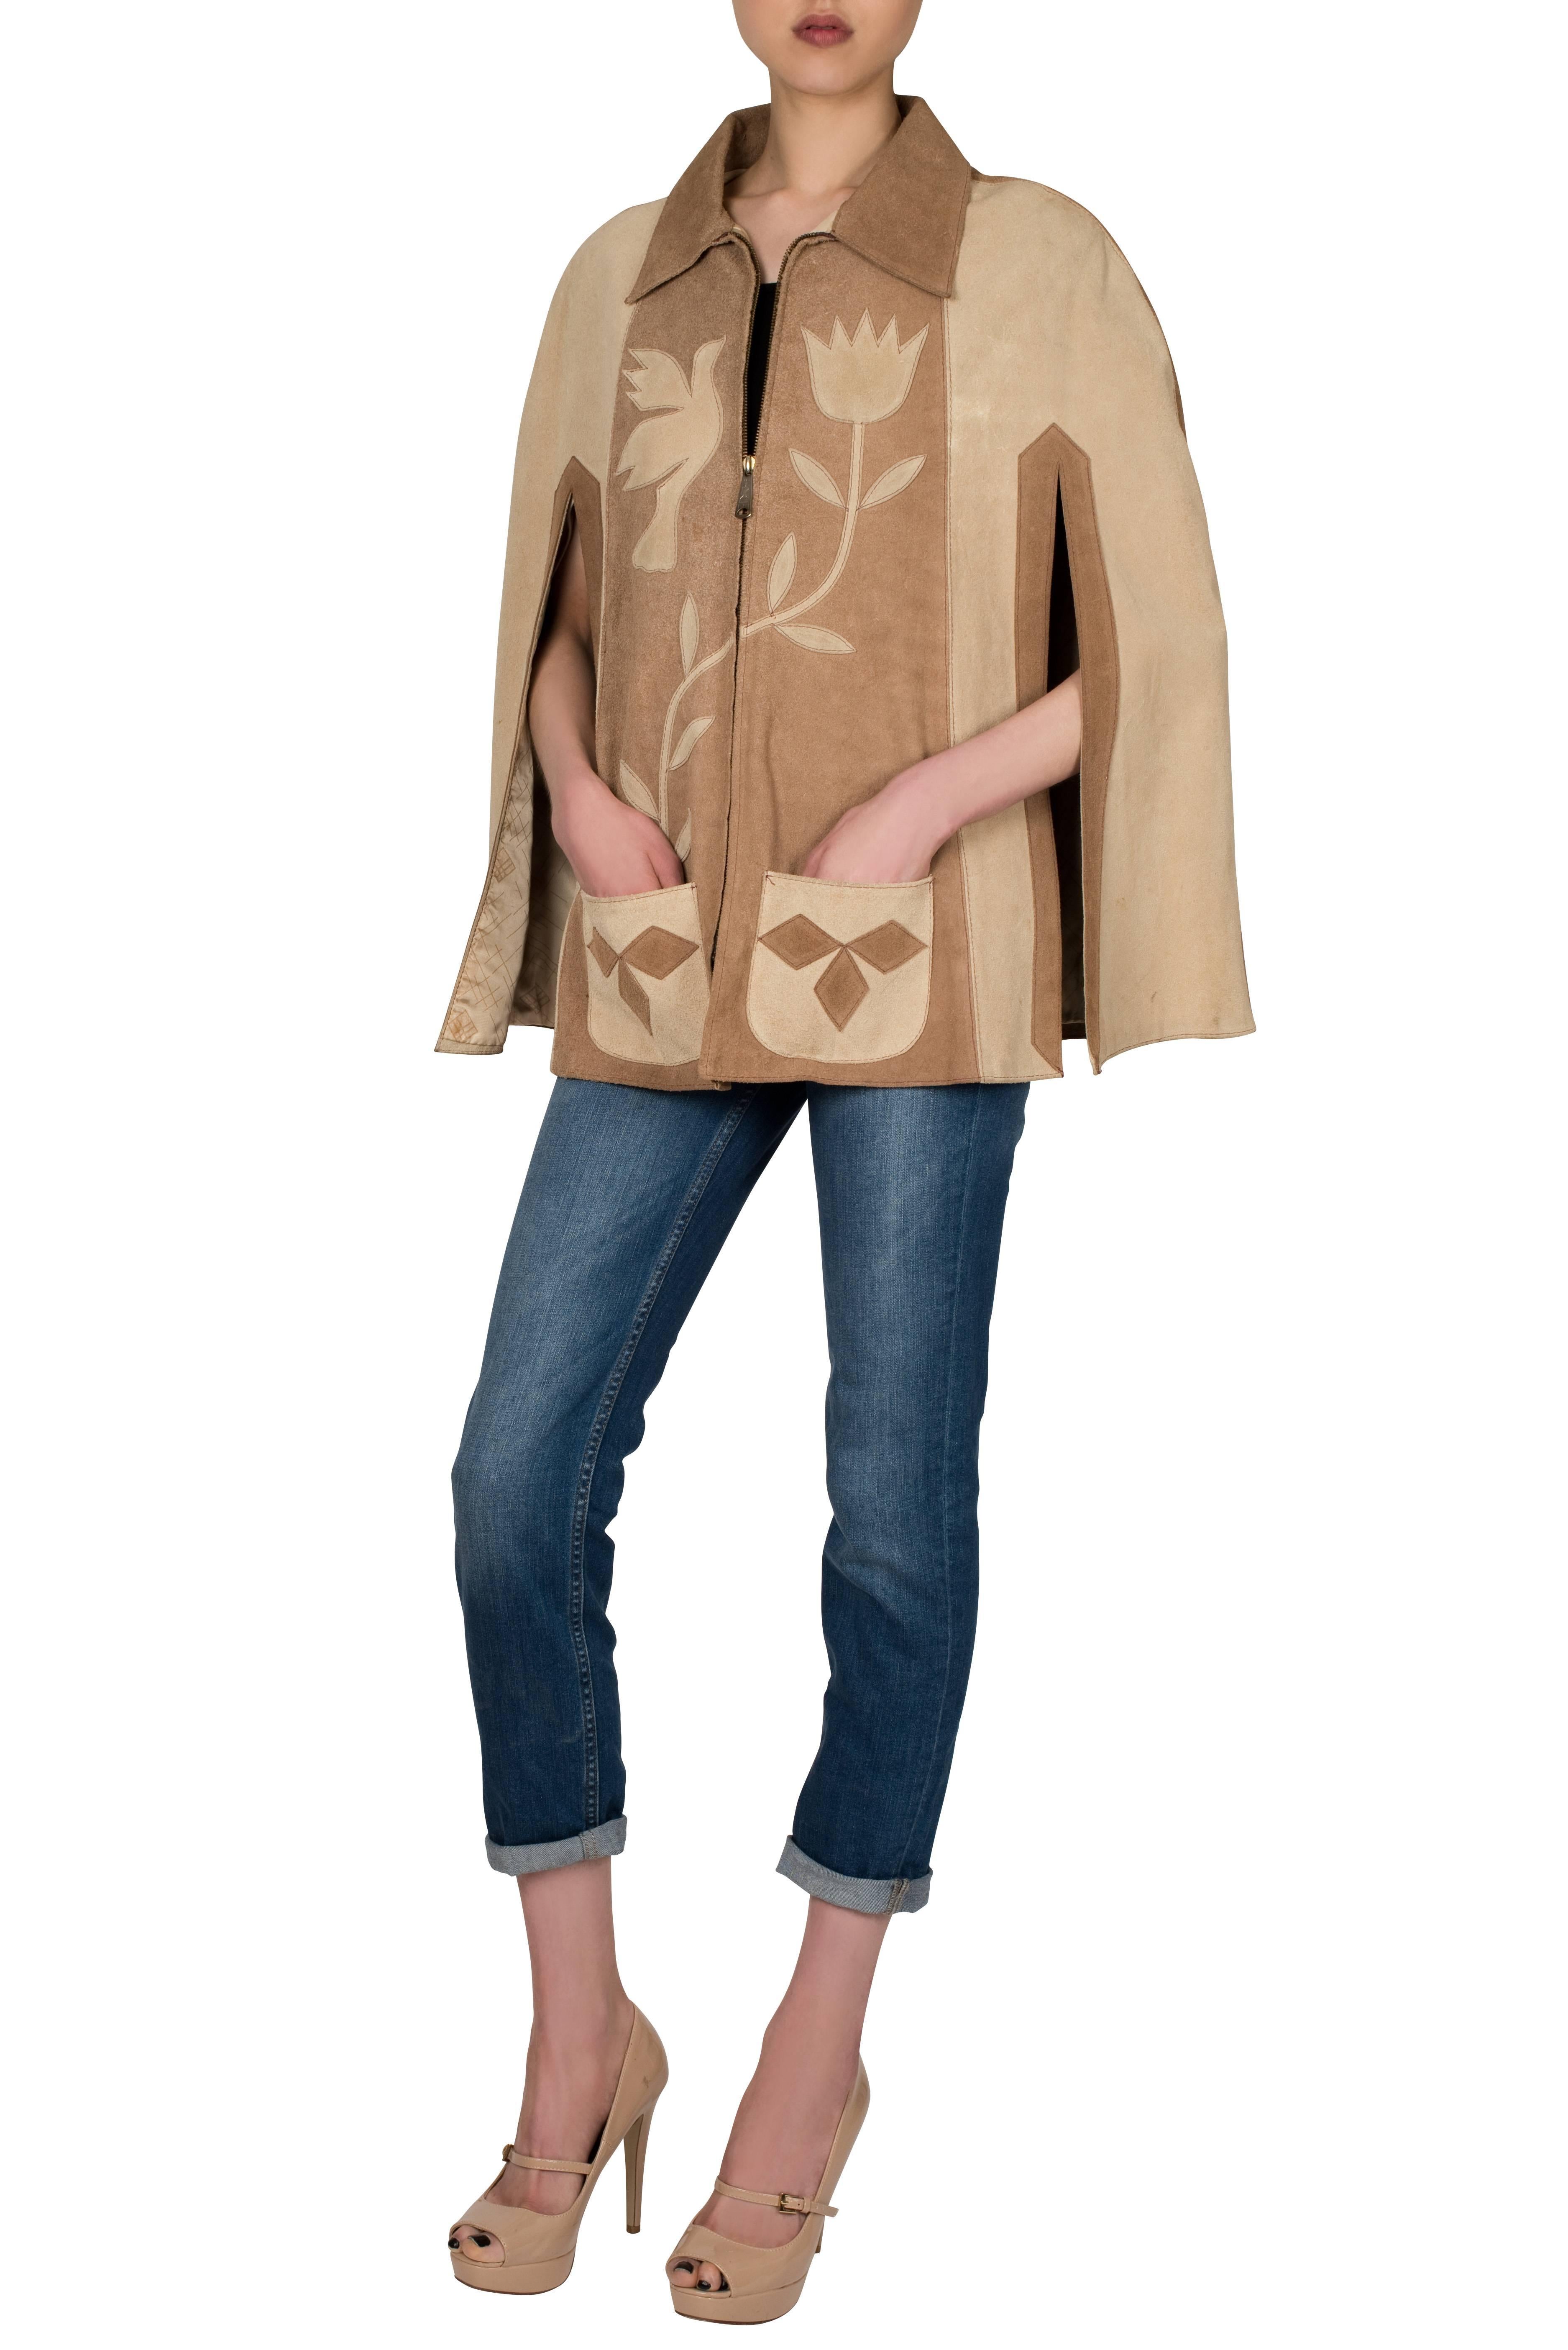 A Mexican-made 1970's suede poncho cape in tan and beige hues. The cape features contrasting appliqués in traditional Mexican designs. Fully lined in a polyester satin, the jacket zips up at the centre front. Excellent vintage condition, no tears